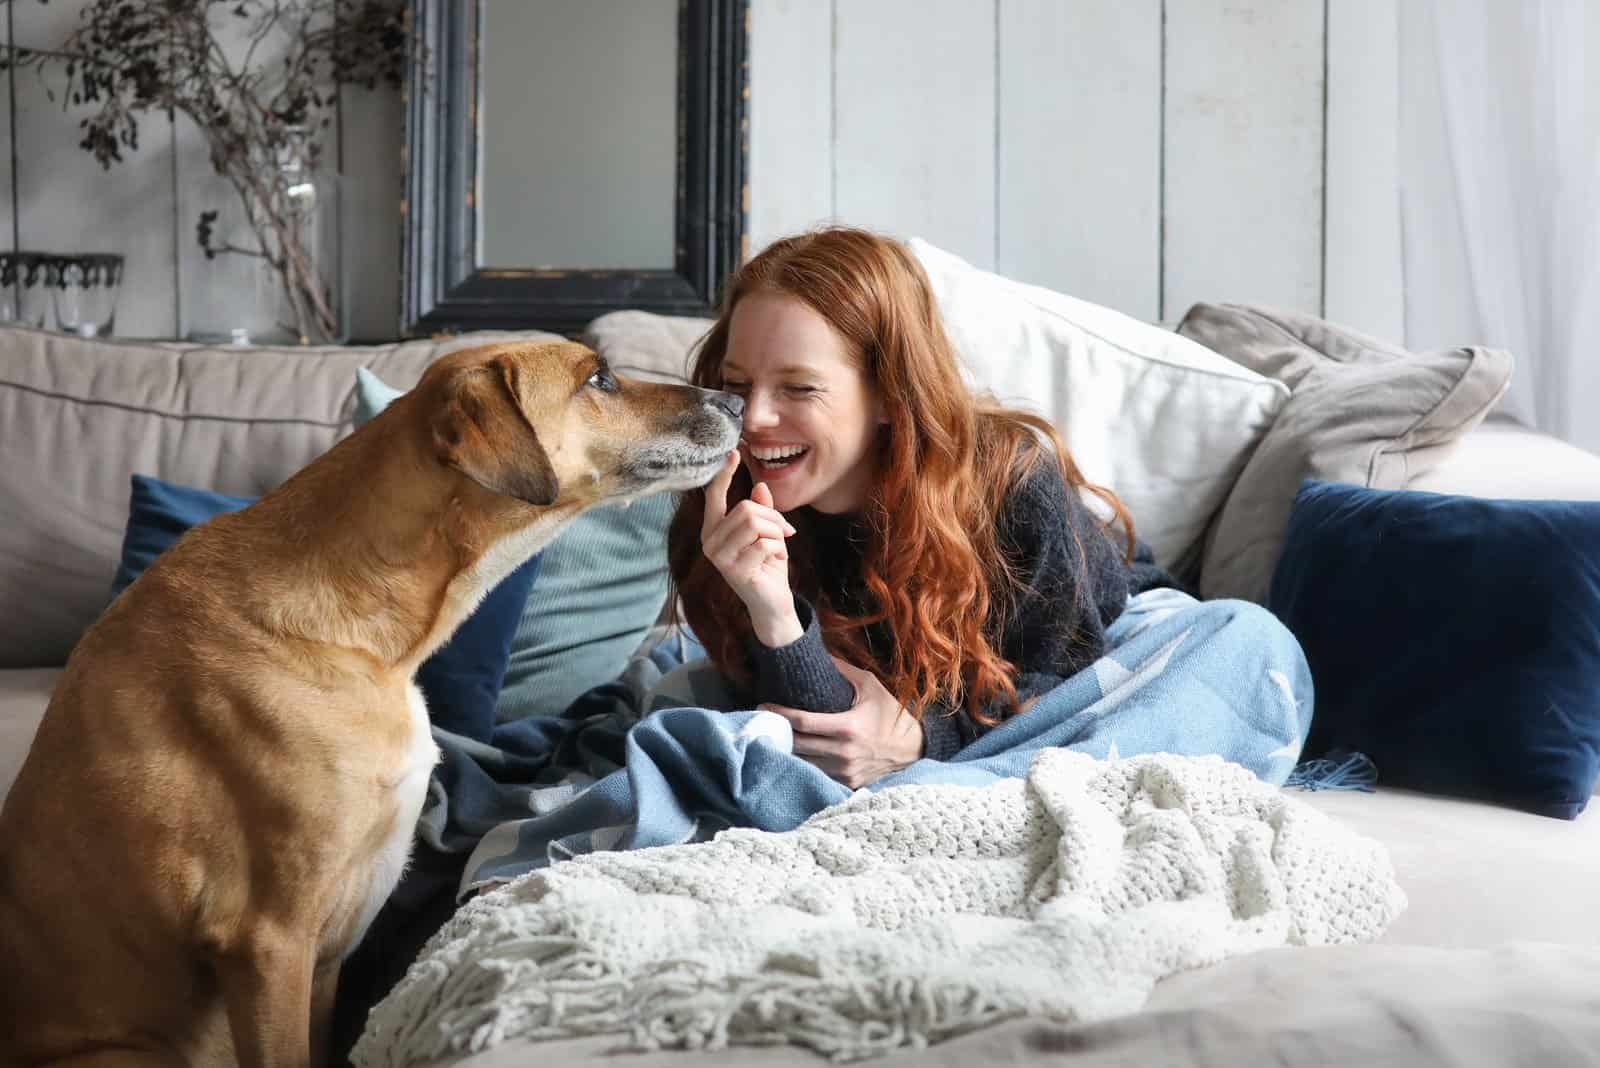 Beautiful redhead woman sitting on a sofa laughing and cuddling a dog